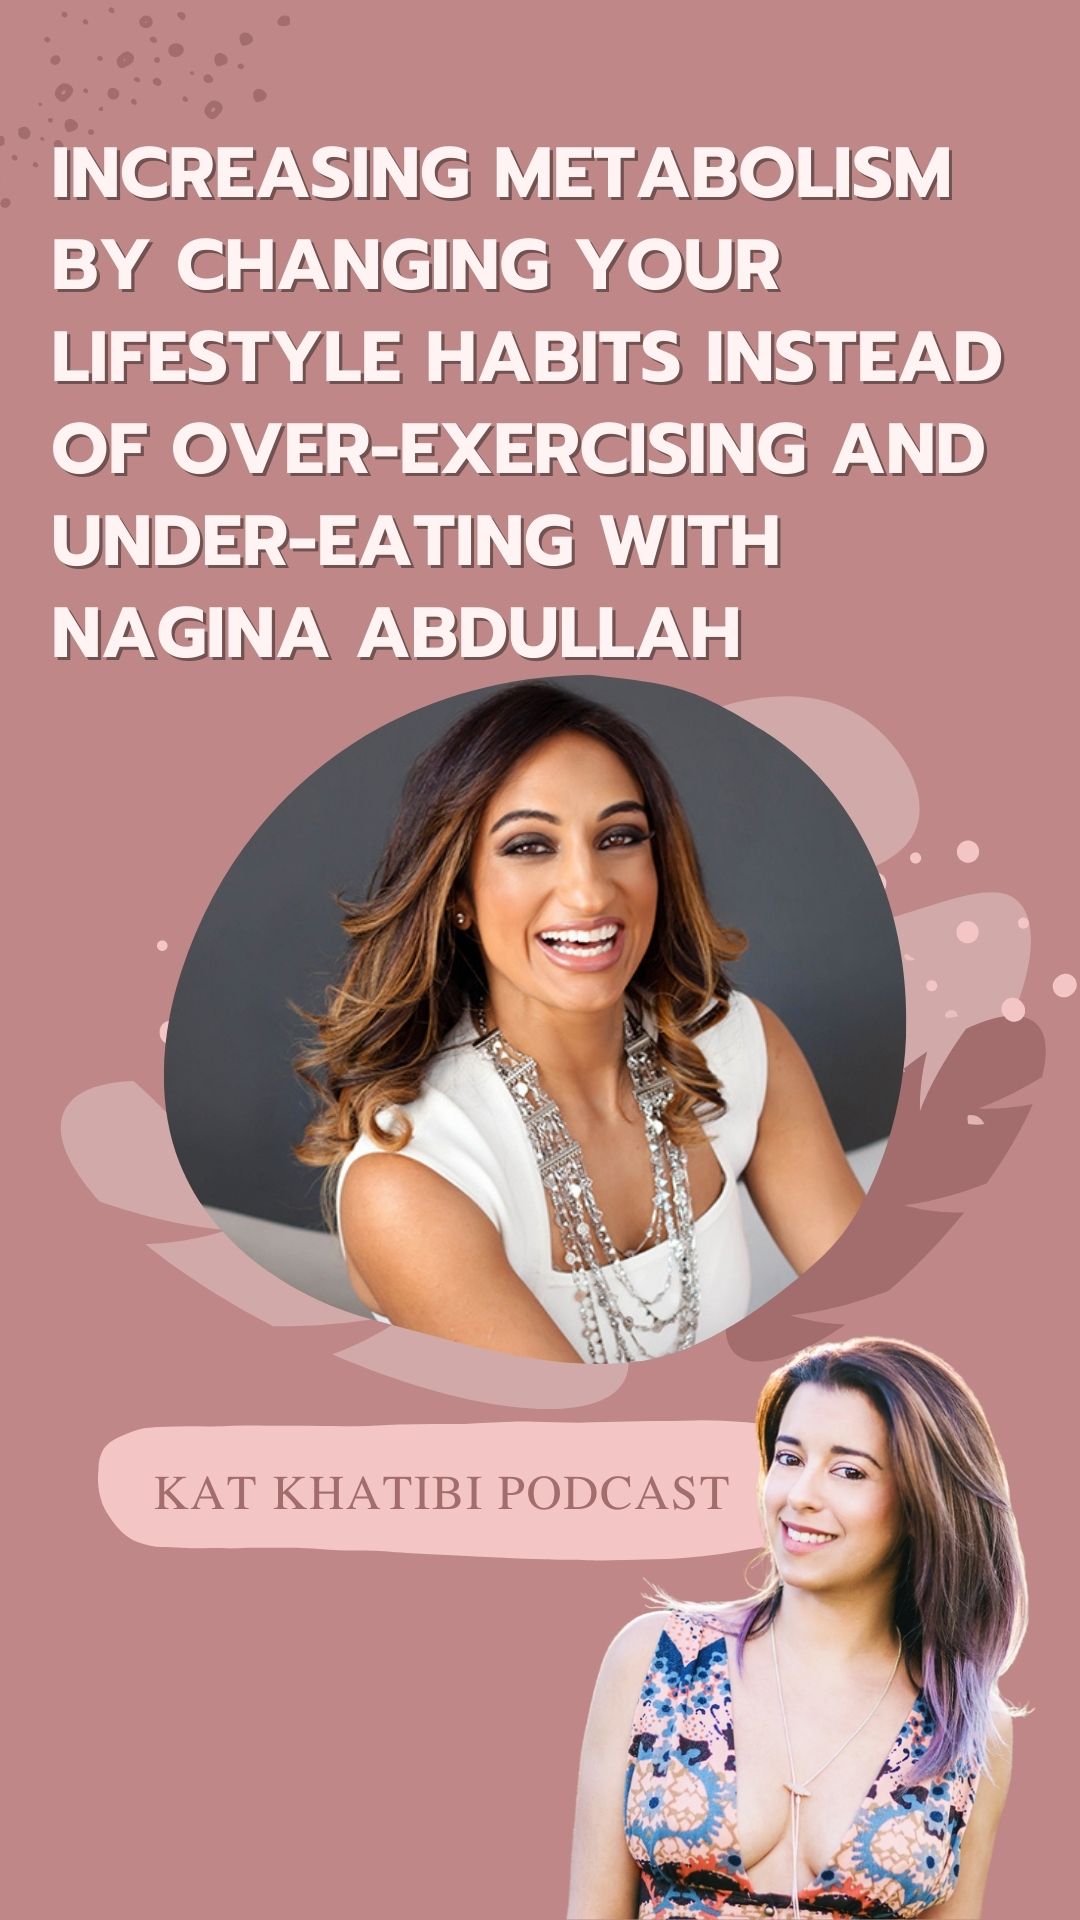 Increasing Metabolism By Changing Your Lifestyle Habits Instead of Over-Exercising and Under-Eating with Nagina Abdullah